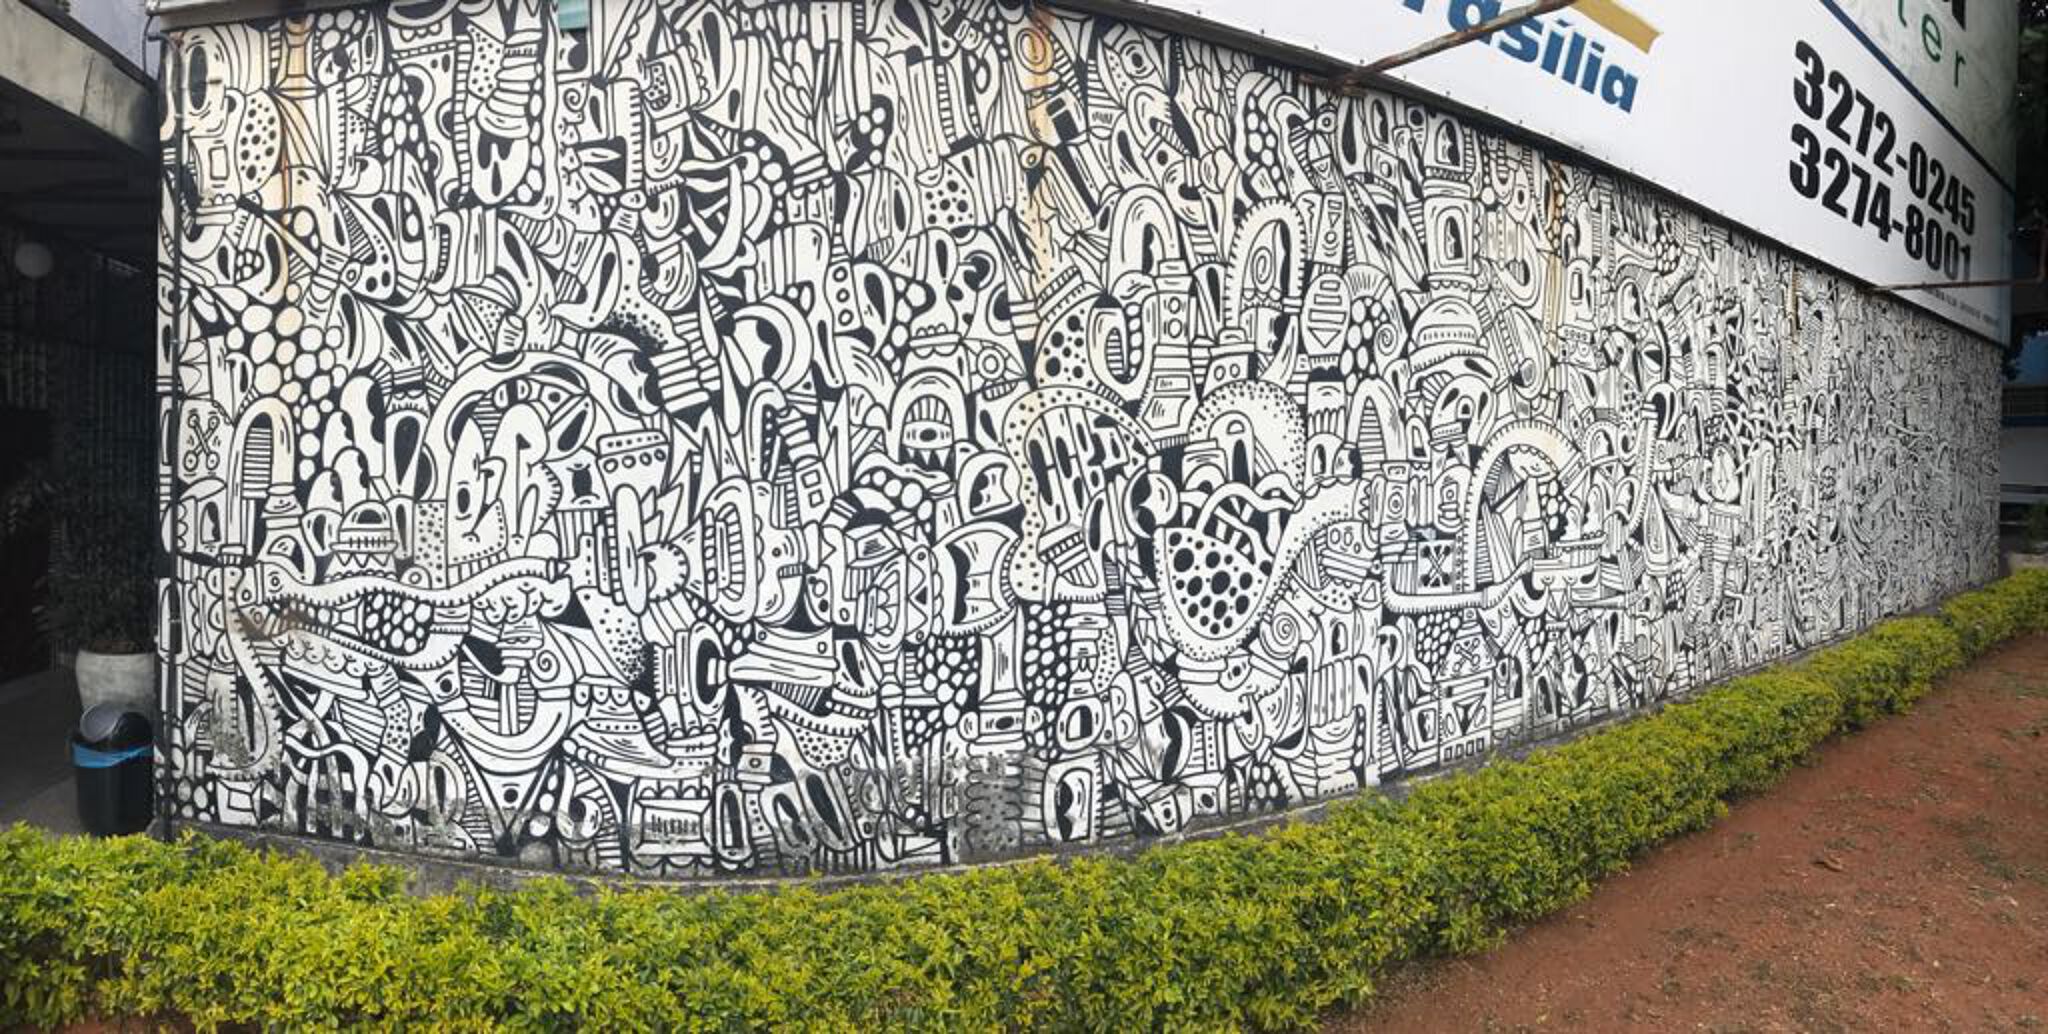 RenatoMoll, Onio&mdash;Policy in Brasil and doodle art, close to each other.